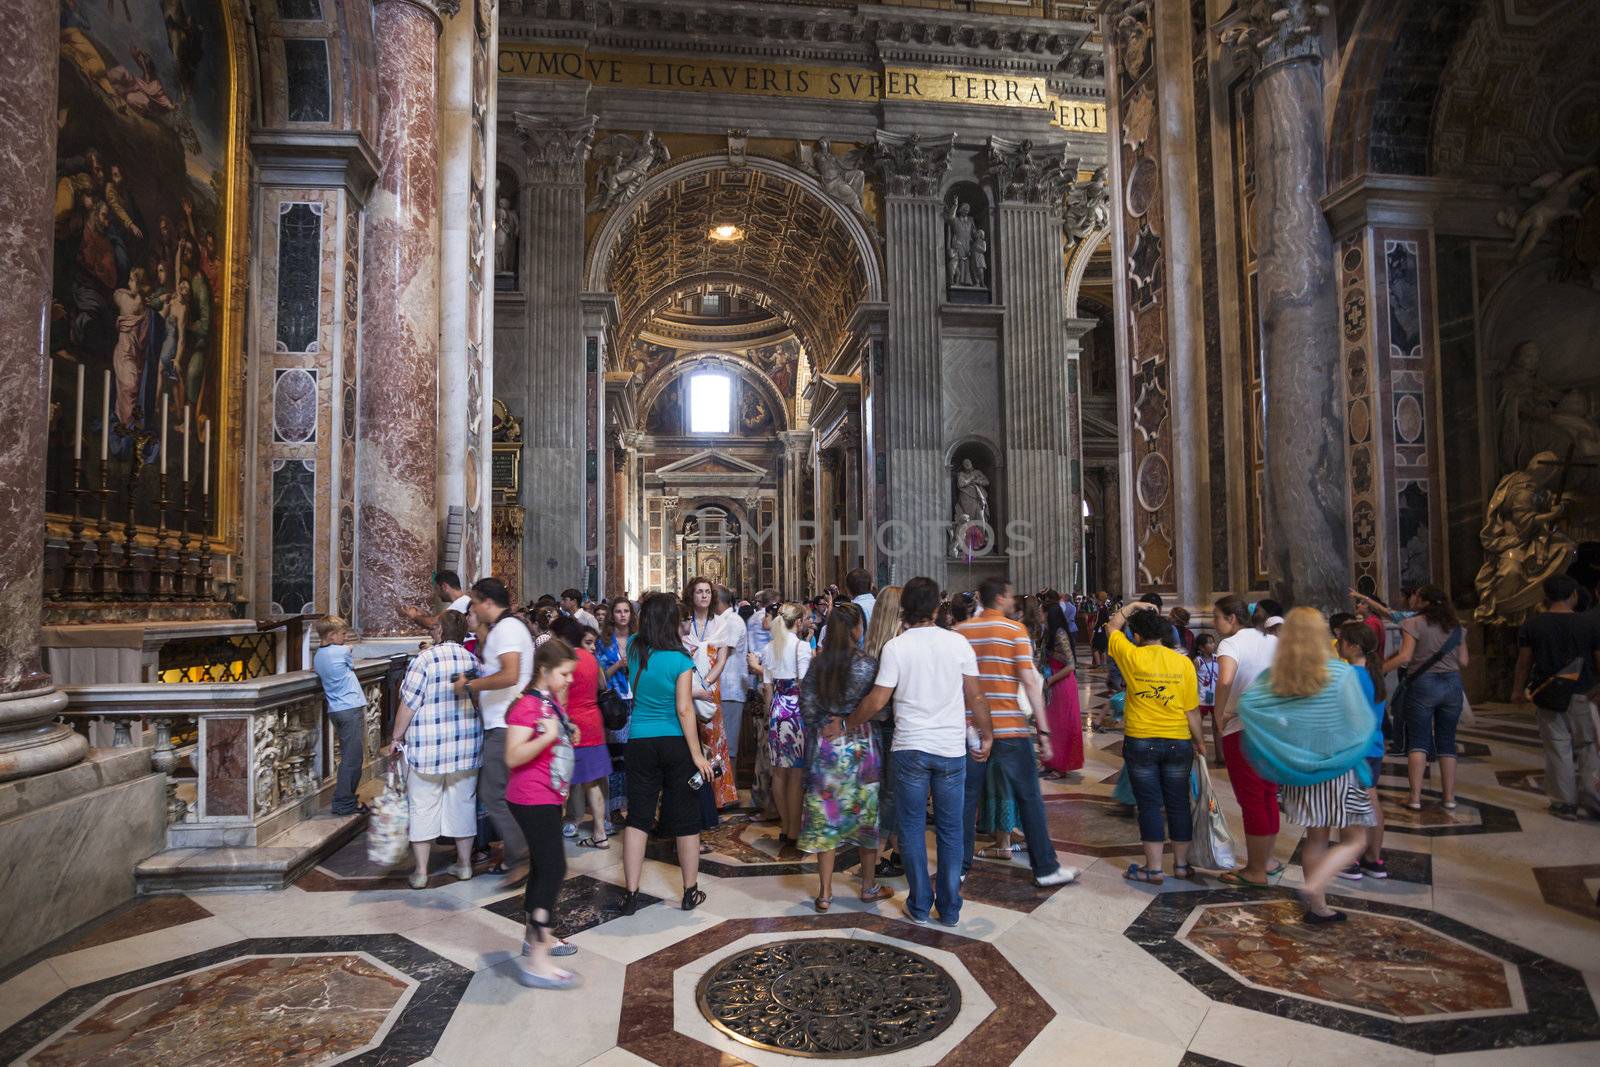 Crowd of tourists Indoor St. Peter's Basilica, Rome, Italy by ints